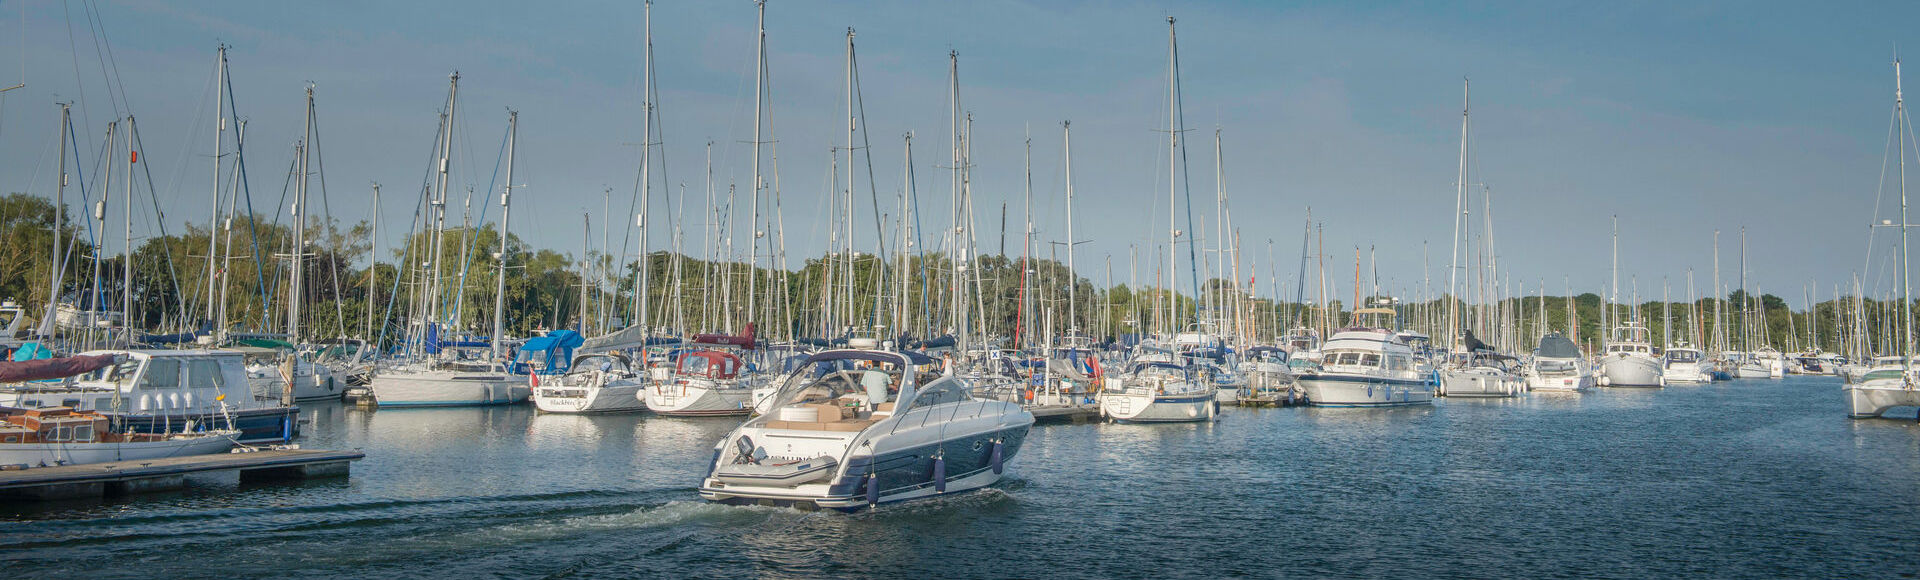 Chichester Marina 2014 28 NW Banner Without Weather 1920X685